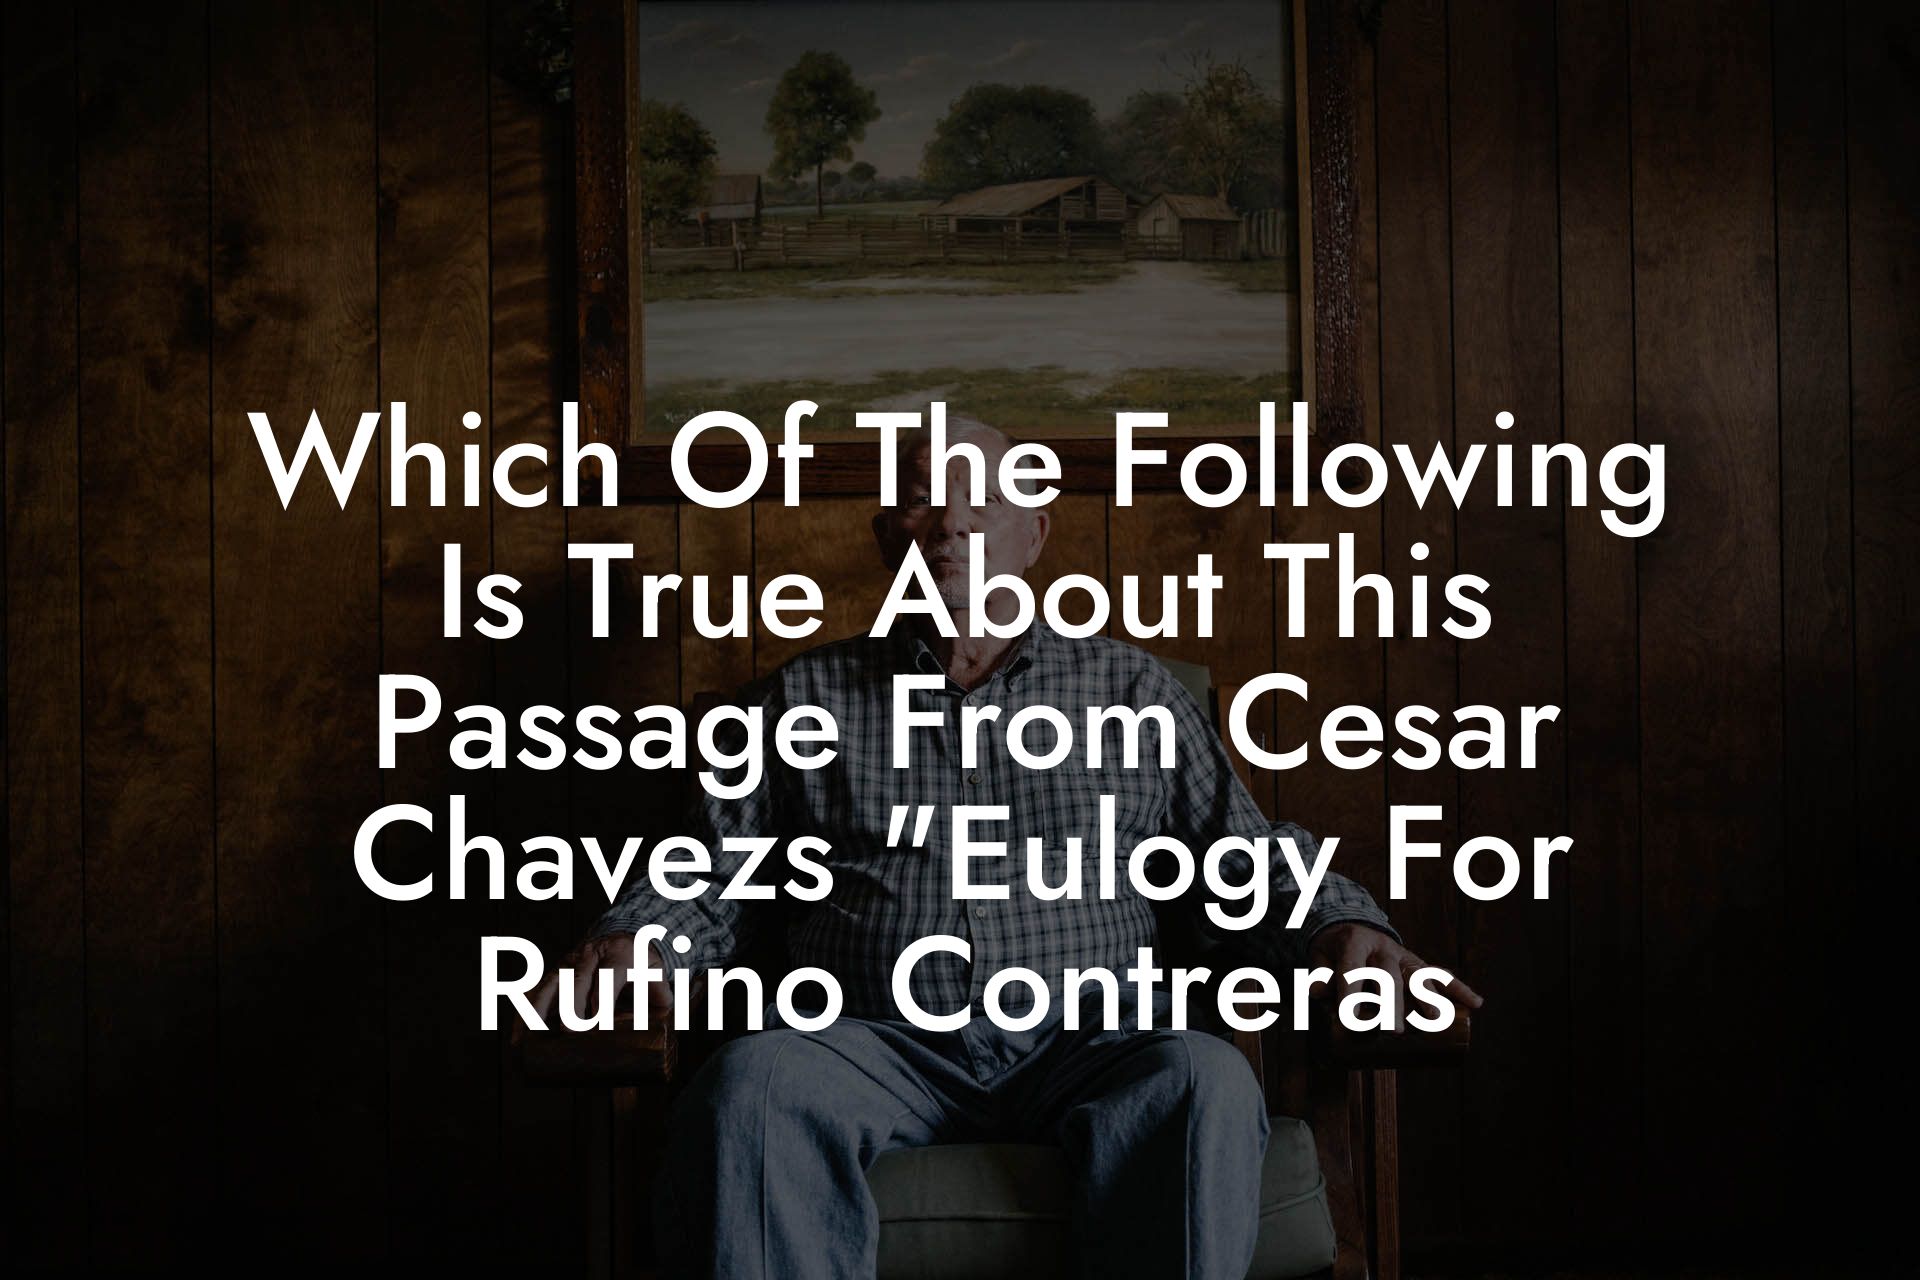 Which Of The Following Is True About This Passage From Cesar Chavezs "Eulogy For Rufino Contreras